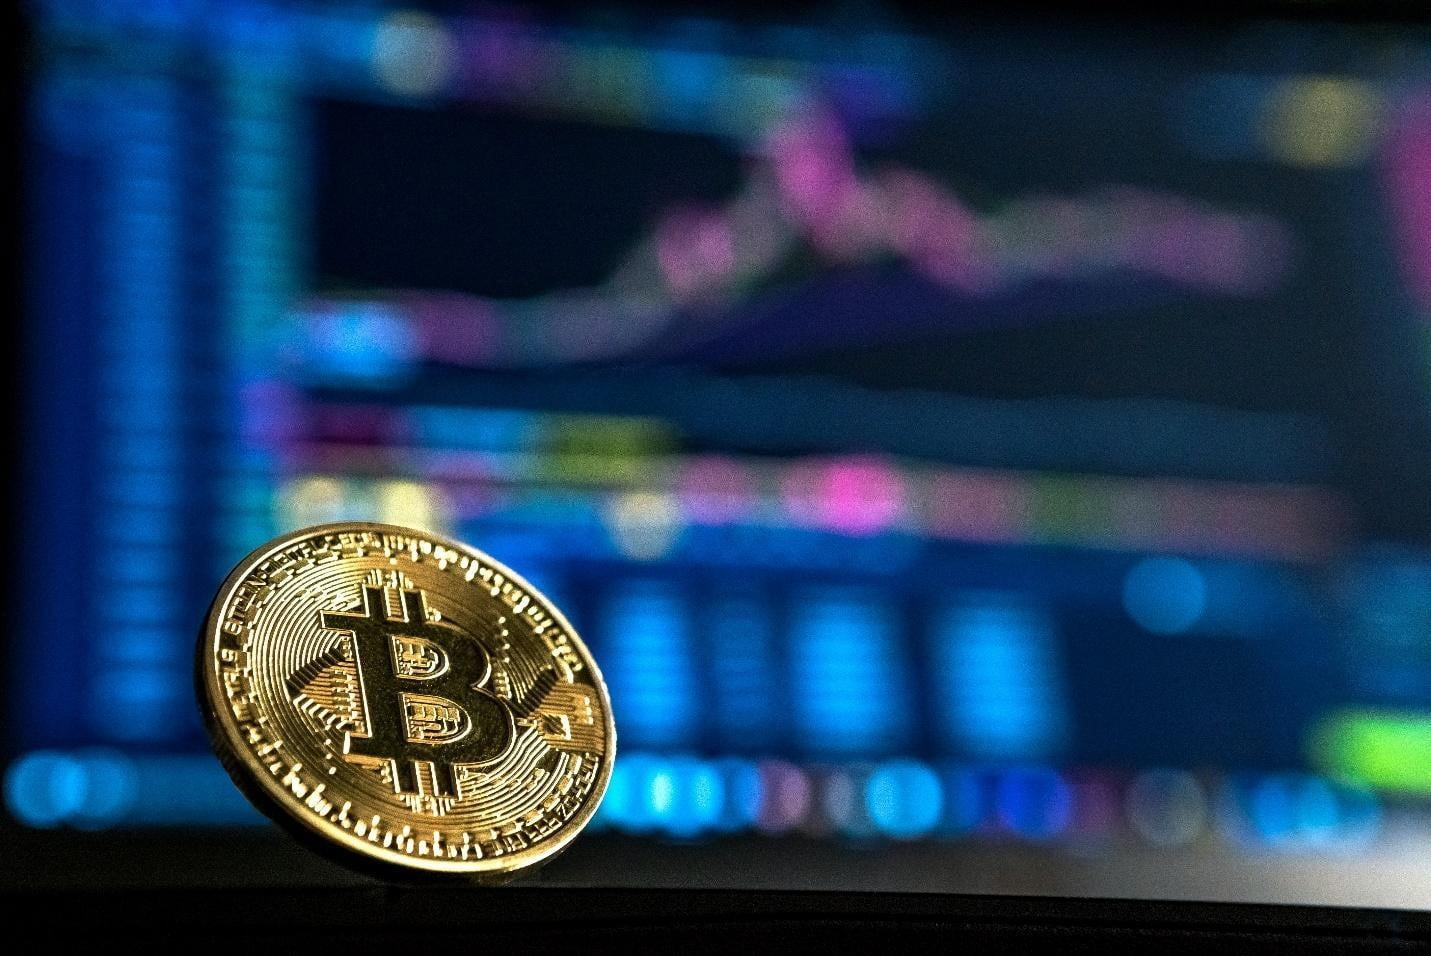 Day Trading Bitcoin: 6 Vital Things to Know